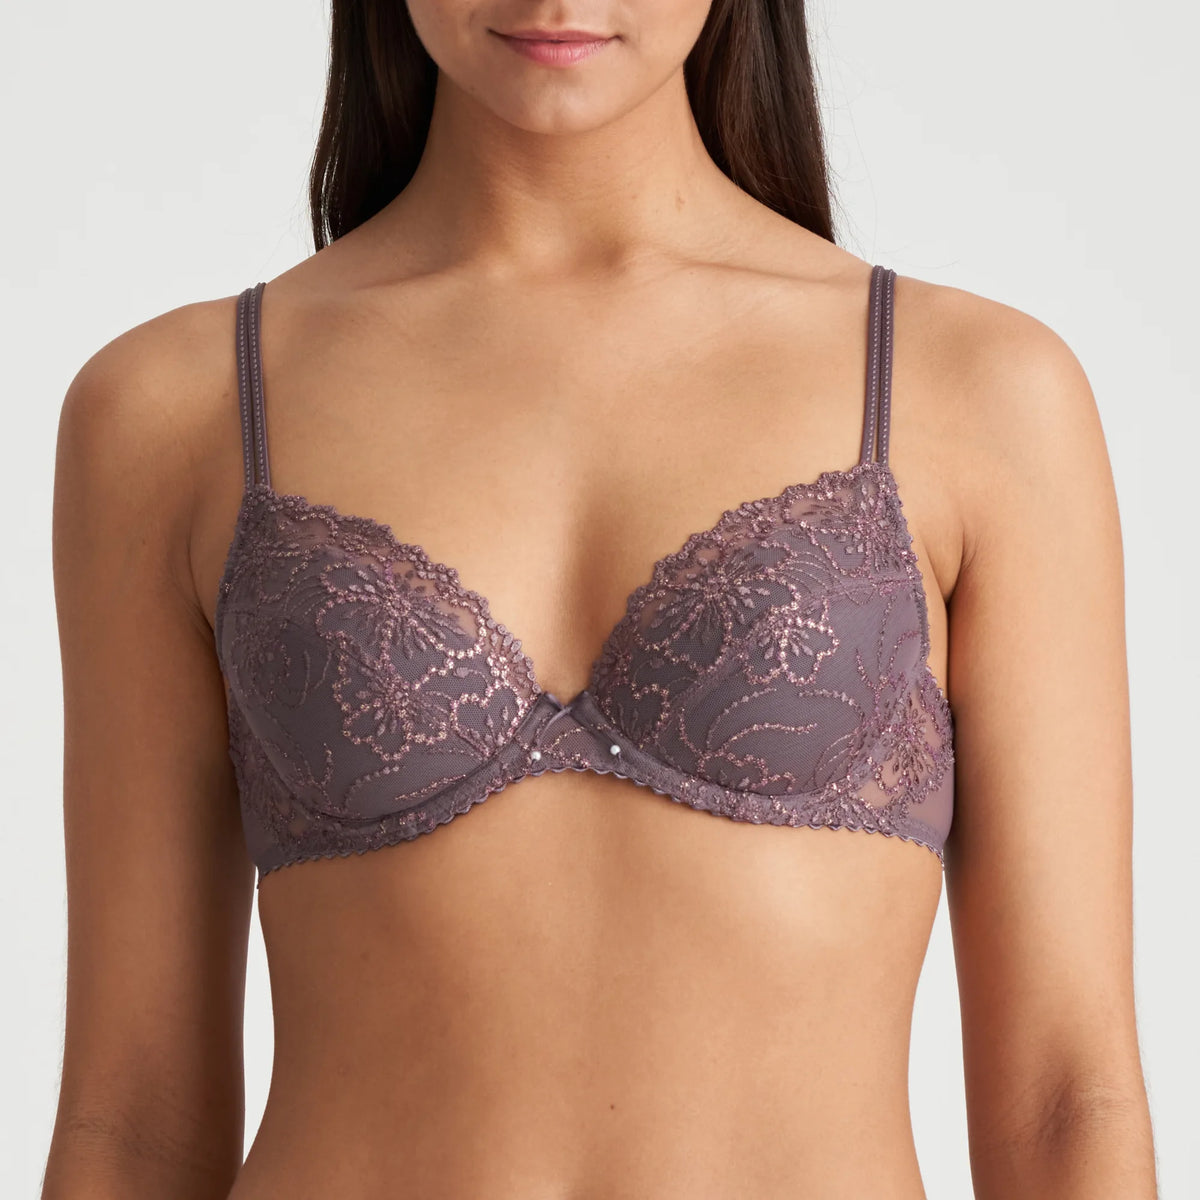 The NEXT Lingeries - Double push up Underwired B cup bra Code no : 1479  Size : 32/70,34/75,36/80 Price : Rs 350/- 3 piece : Rs 900/